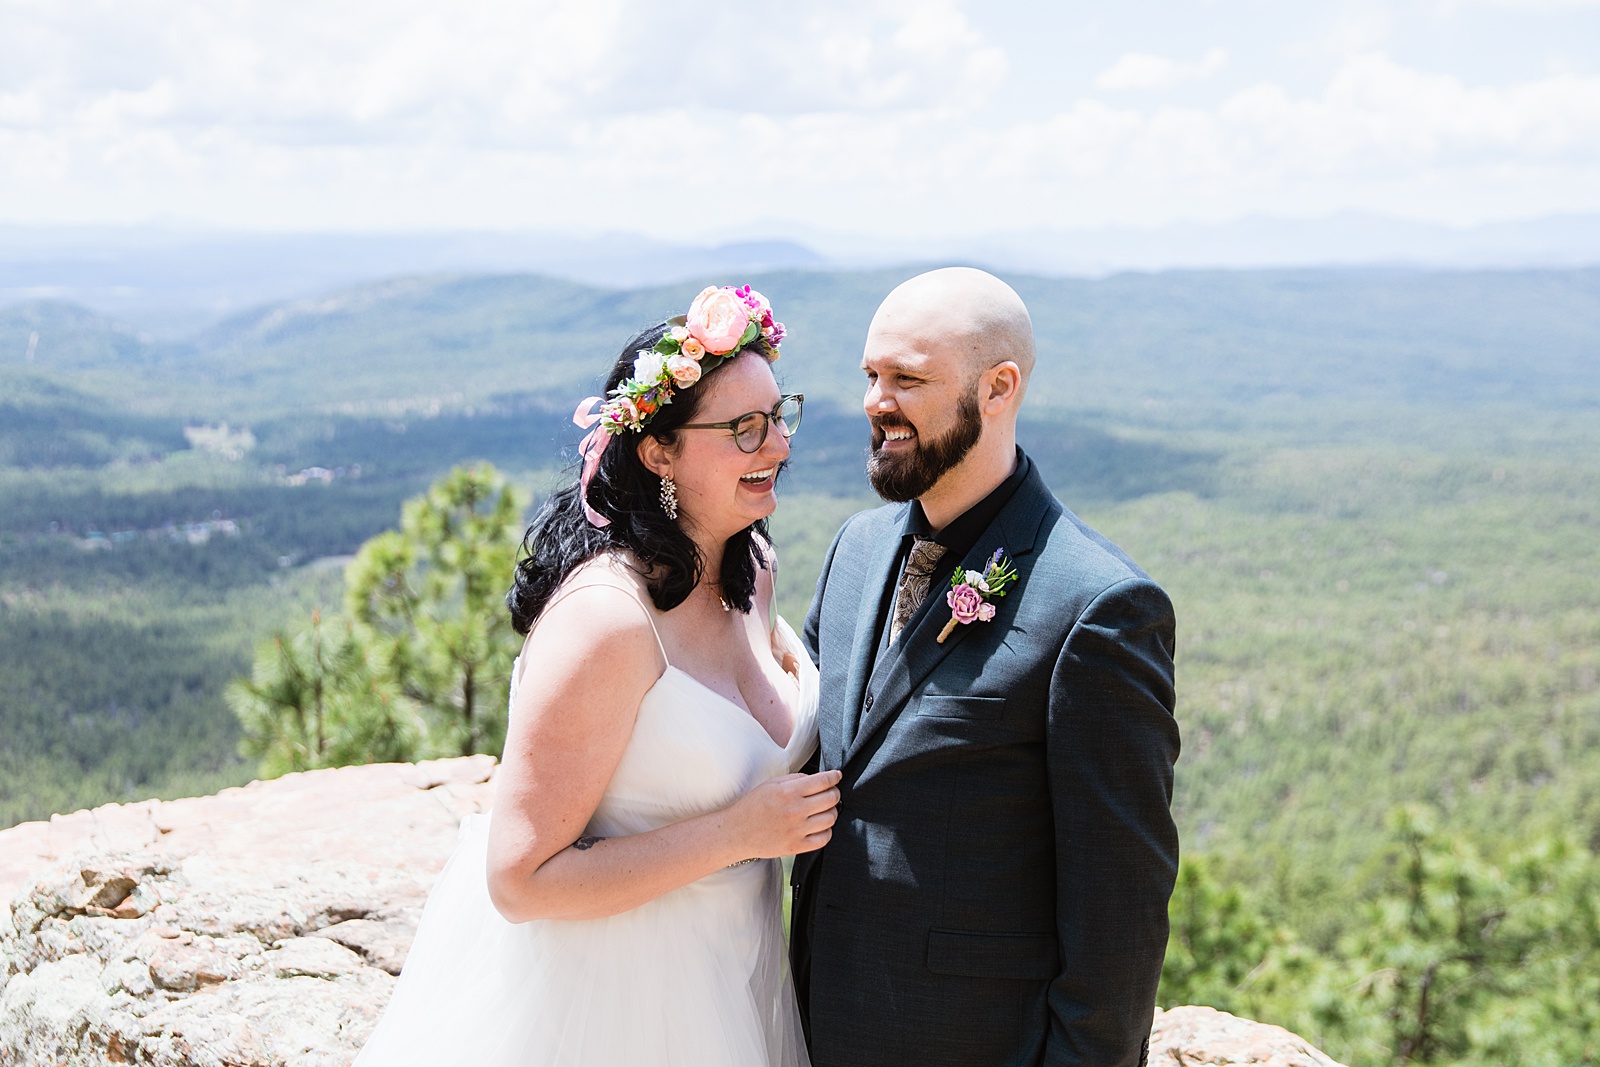 Bride & Groom laughing together during their Mogollon Rim elopement by Payson elopement photographer PMA Photography.